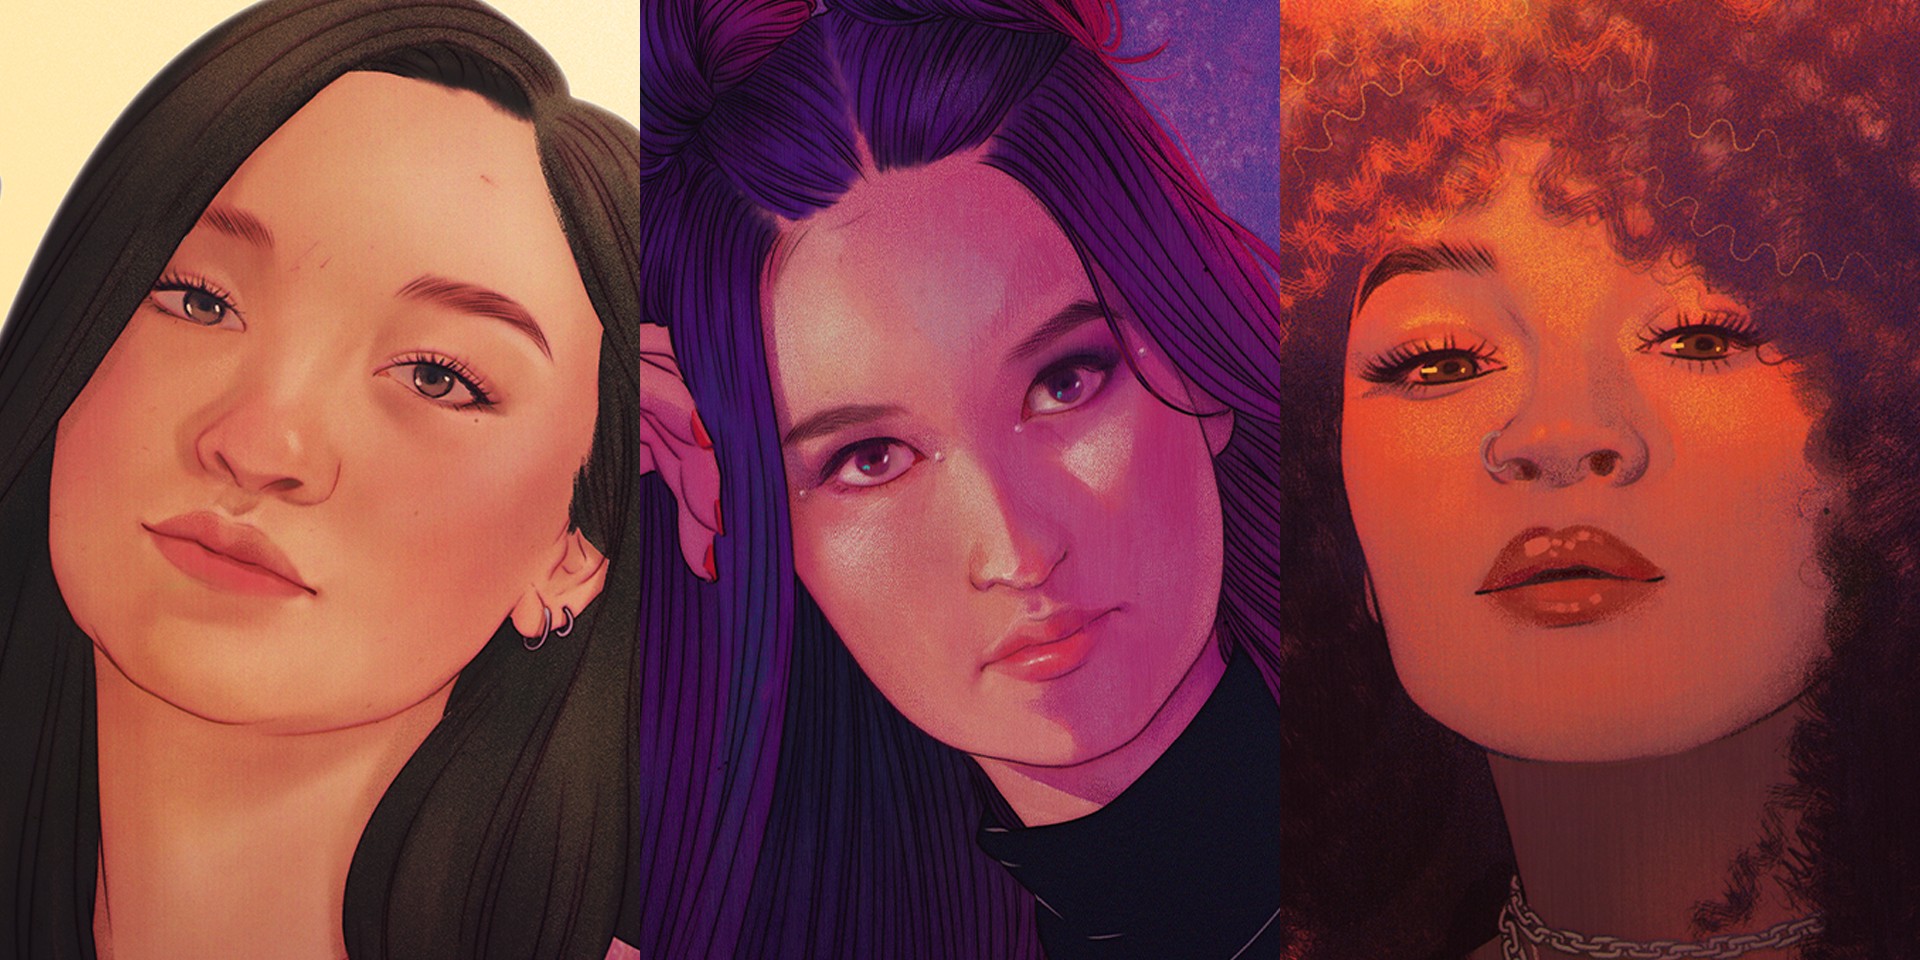 mxmtoon, Stephanie Poetri, Wolftyla to share the experiences of Asian women in ILLUMINATED webcomic series 